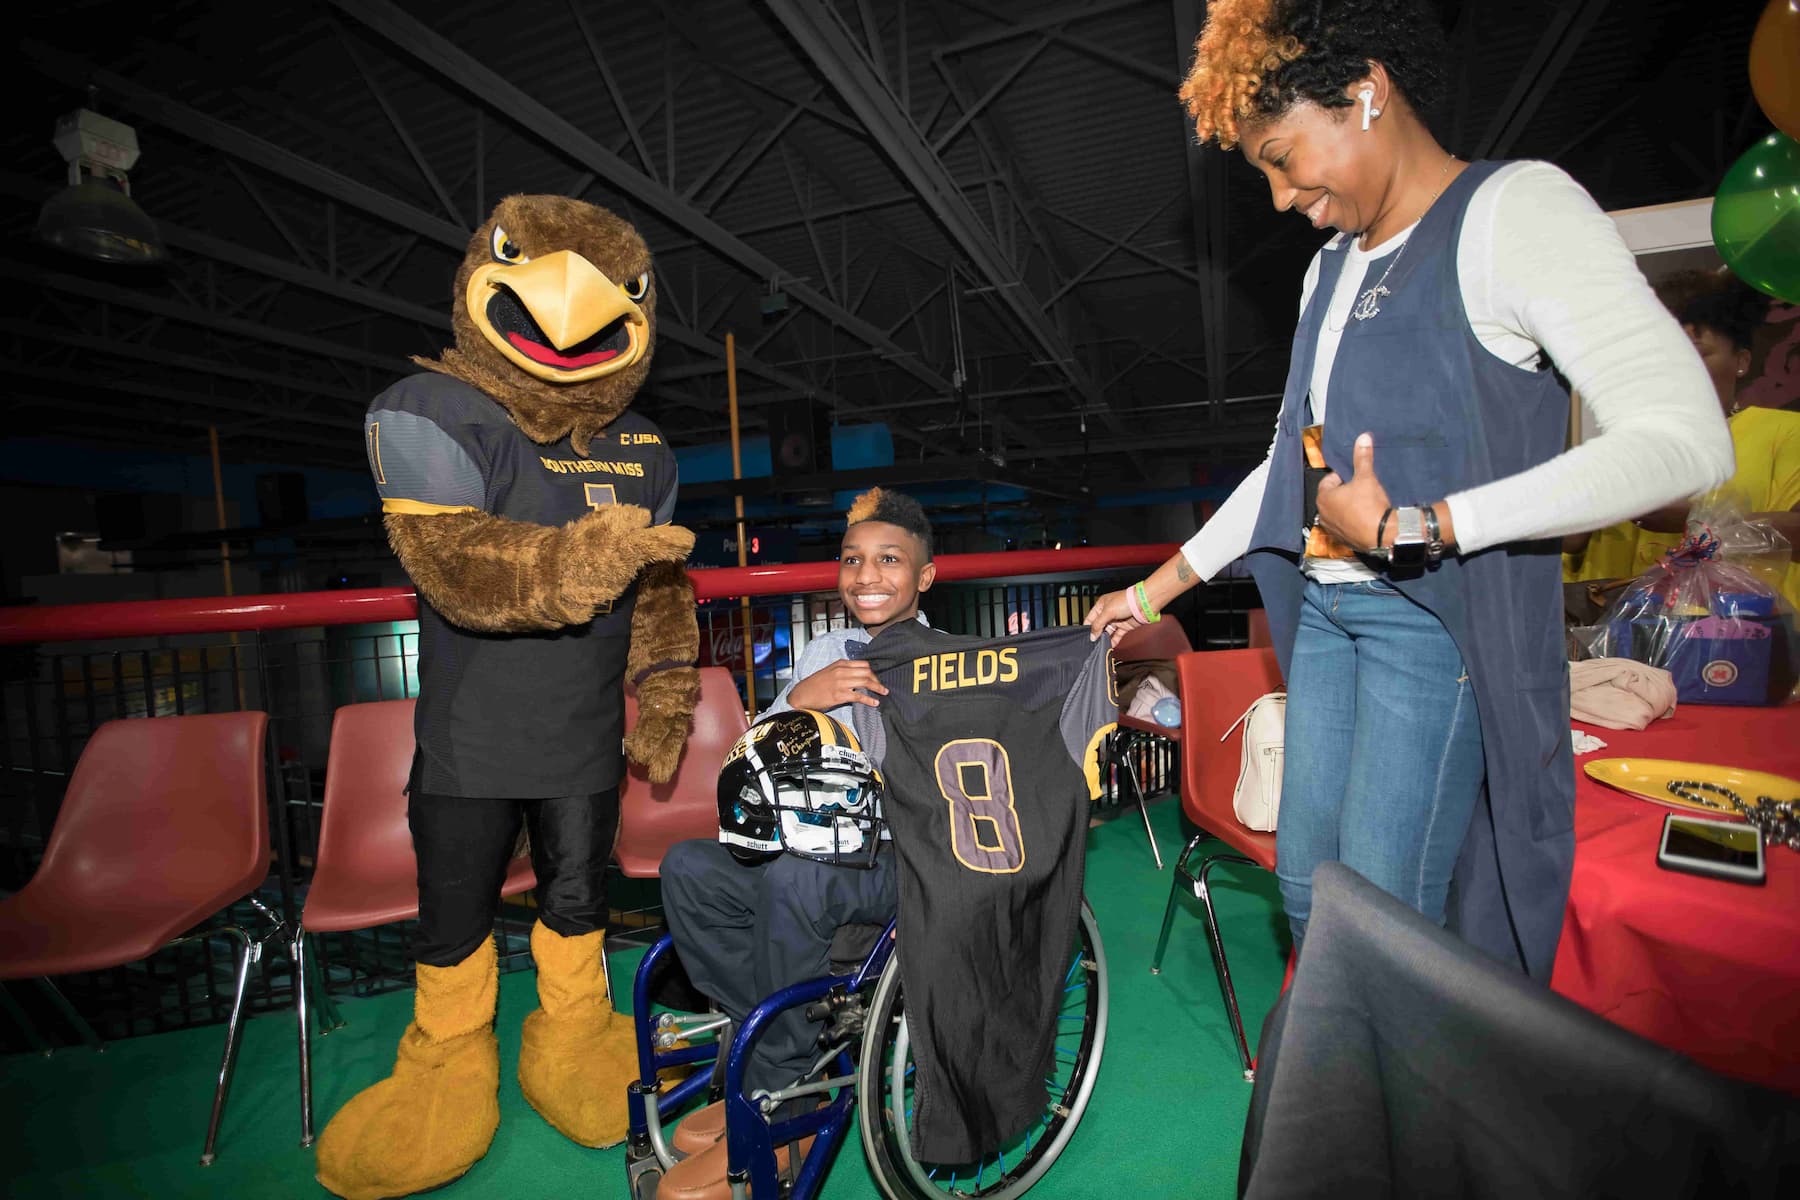 2018 Children's Miracle Network Champion KJ Fields and mom DeeWanda Fields, a University of Southern Mississippi alumna, smile with Southern Miss mascot Seymour.